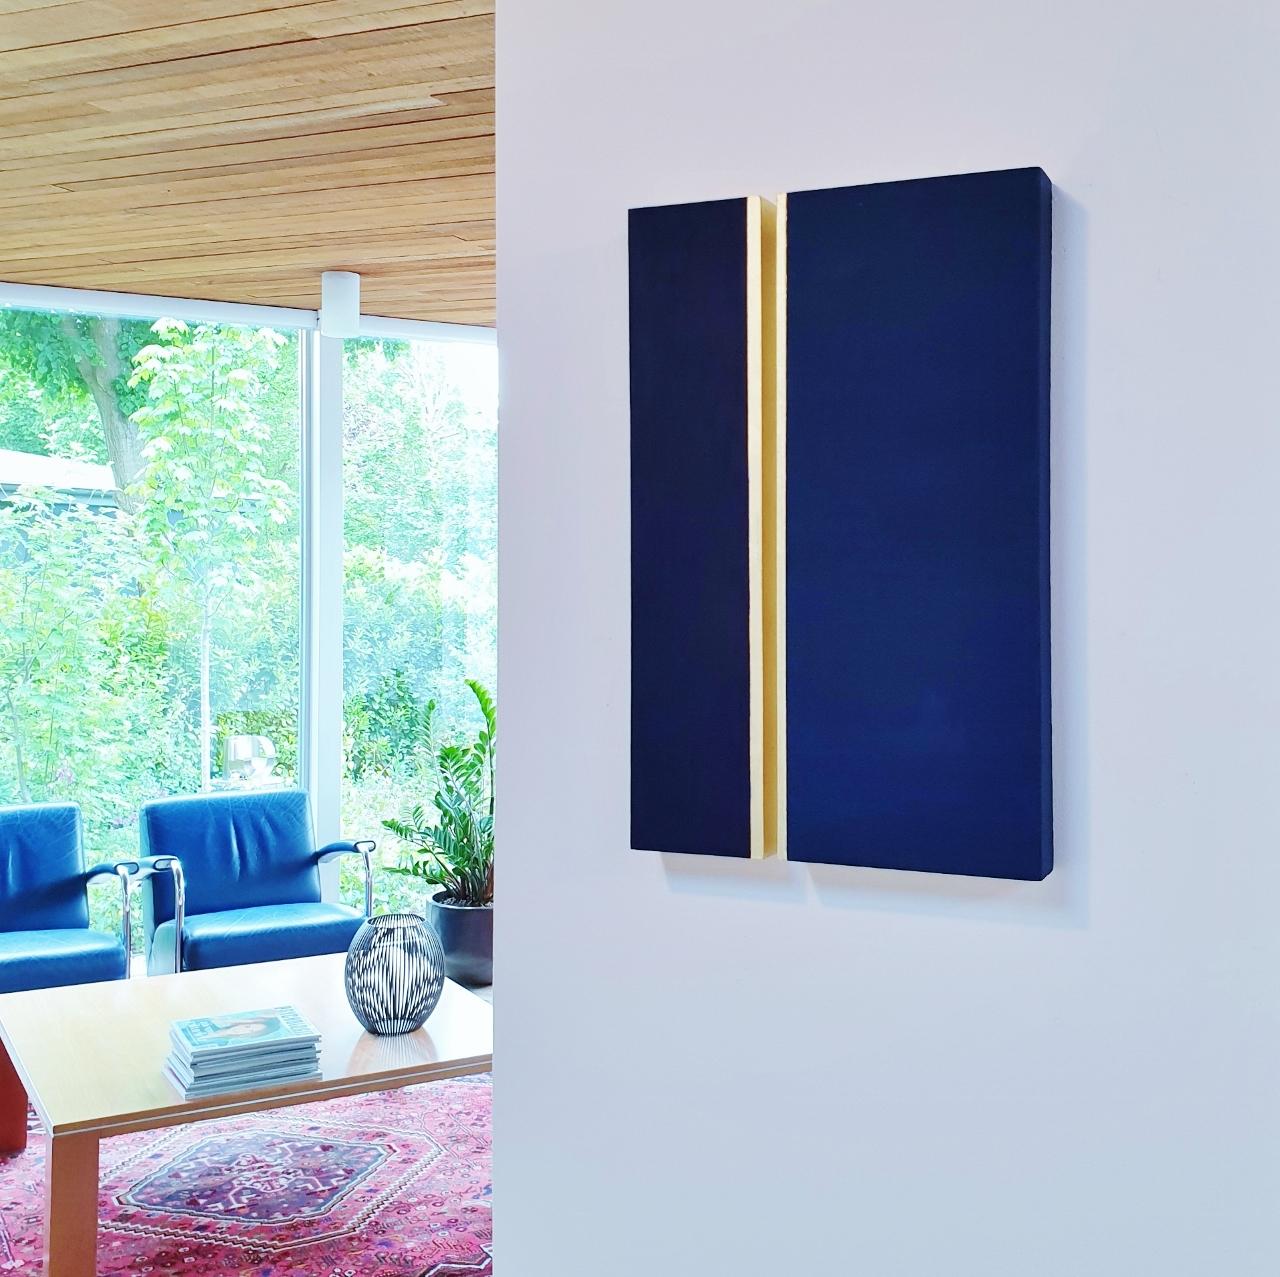 Rayon lumineux - blue gold contemporary modern sculpture painting relief - Painting by Olivier Julia